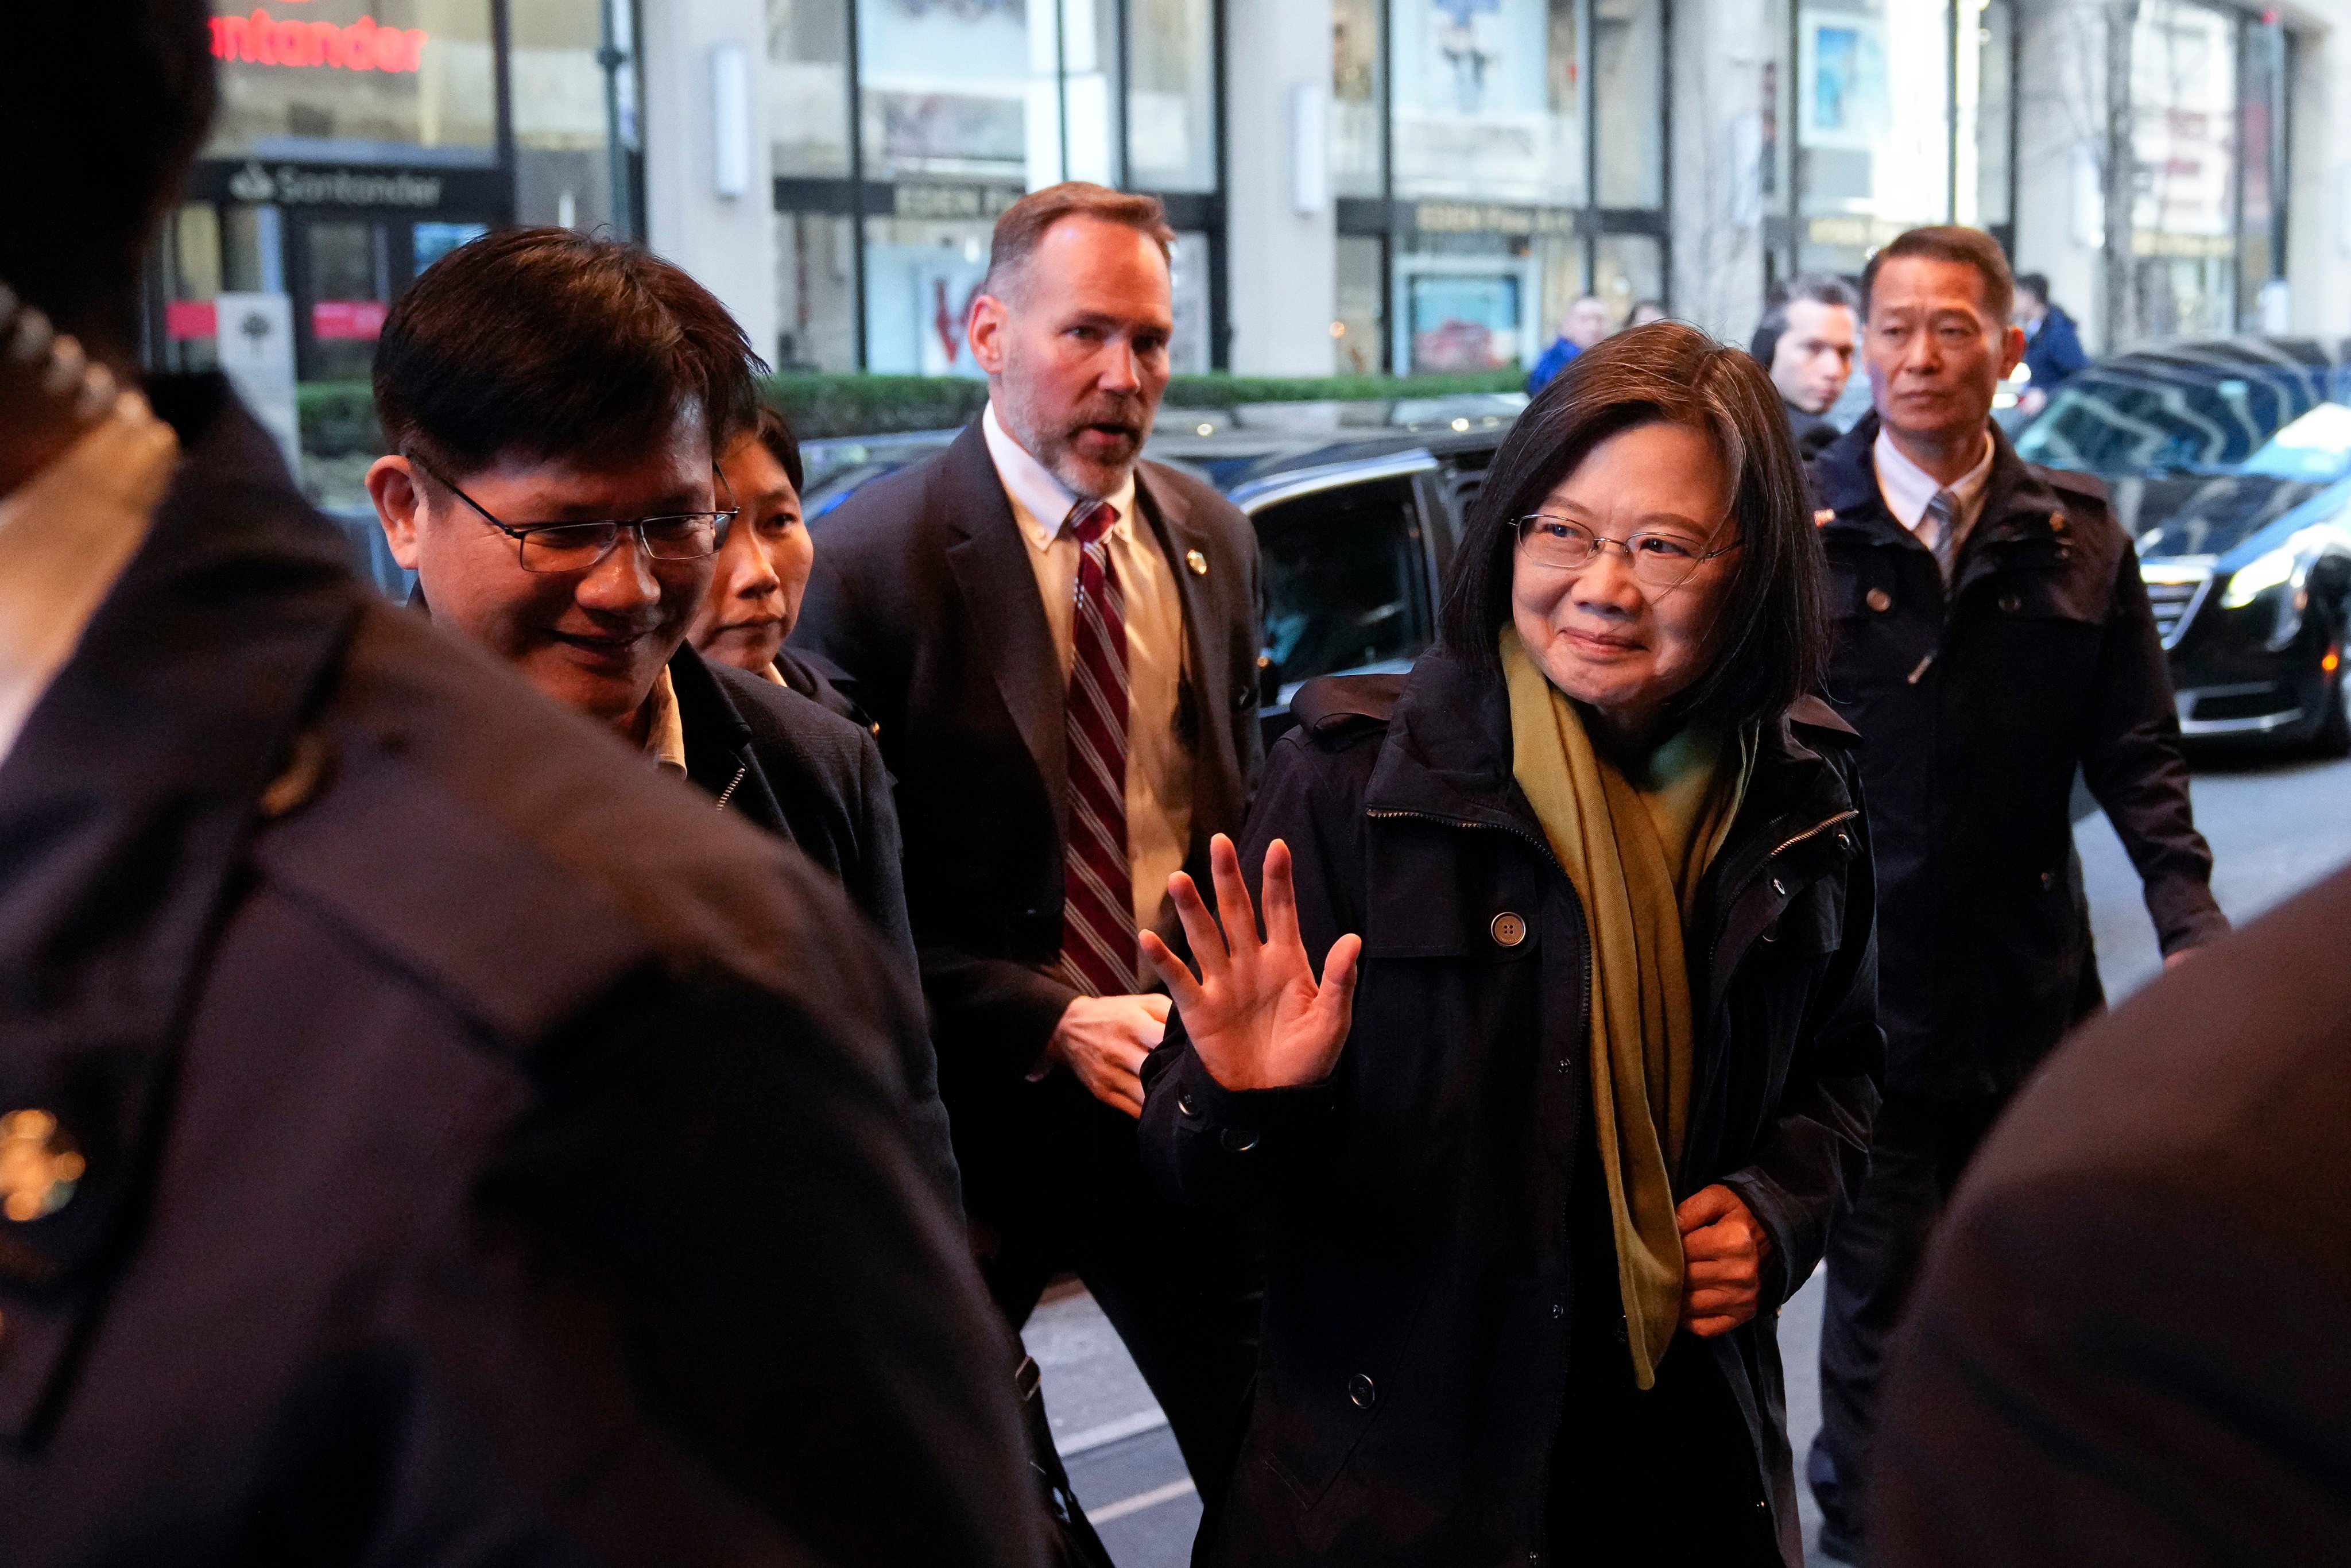 Taiwanese President Tsai Ing-wen waves as she arrives at a hotel in New York on March 30, a day before flying to Central America. Photo: AP 